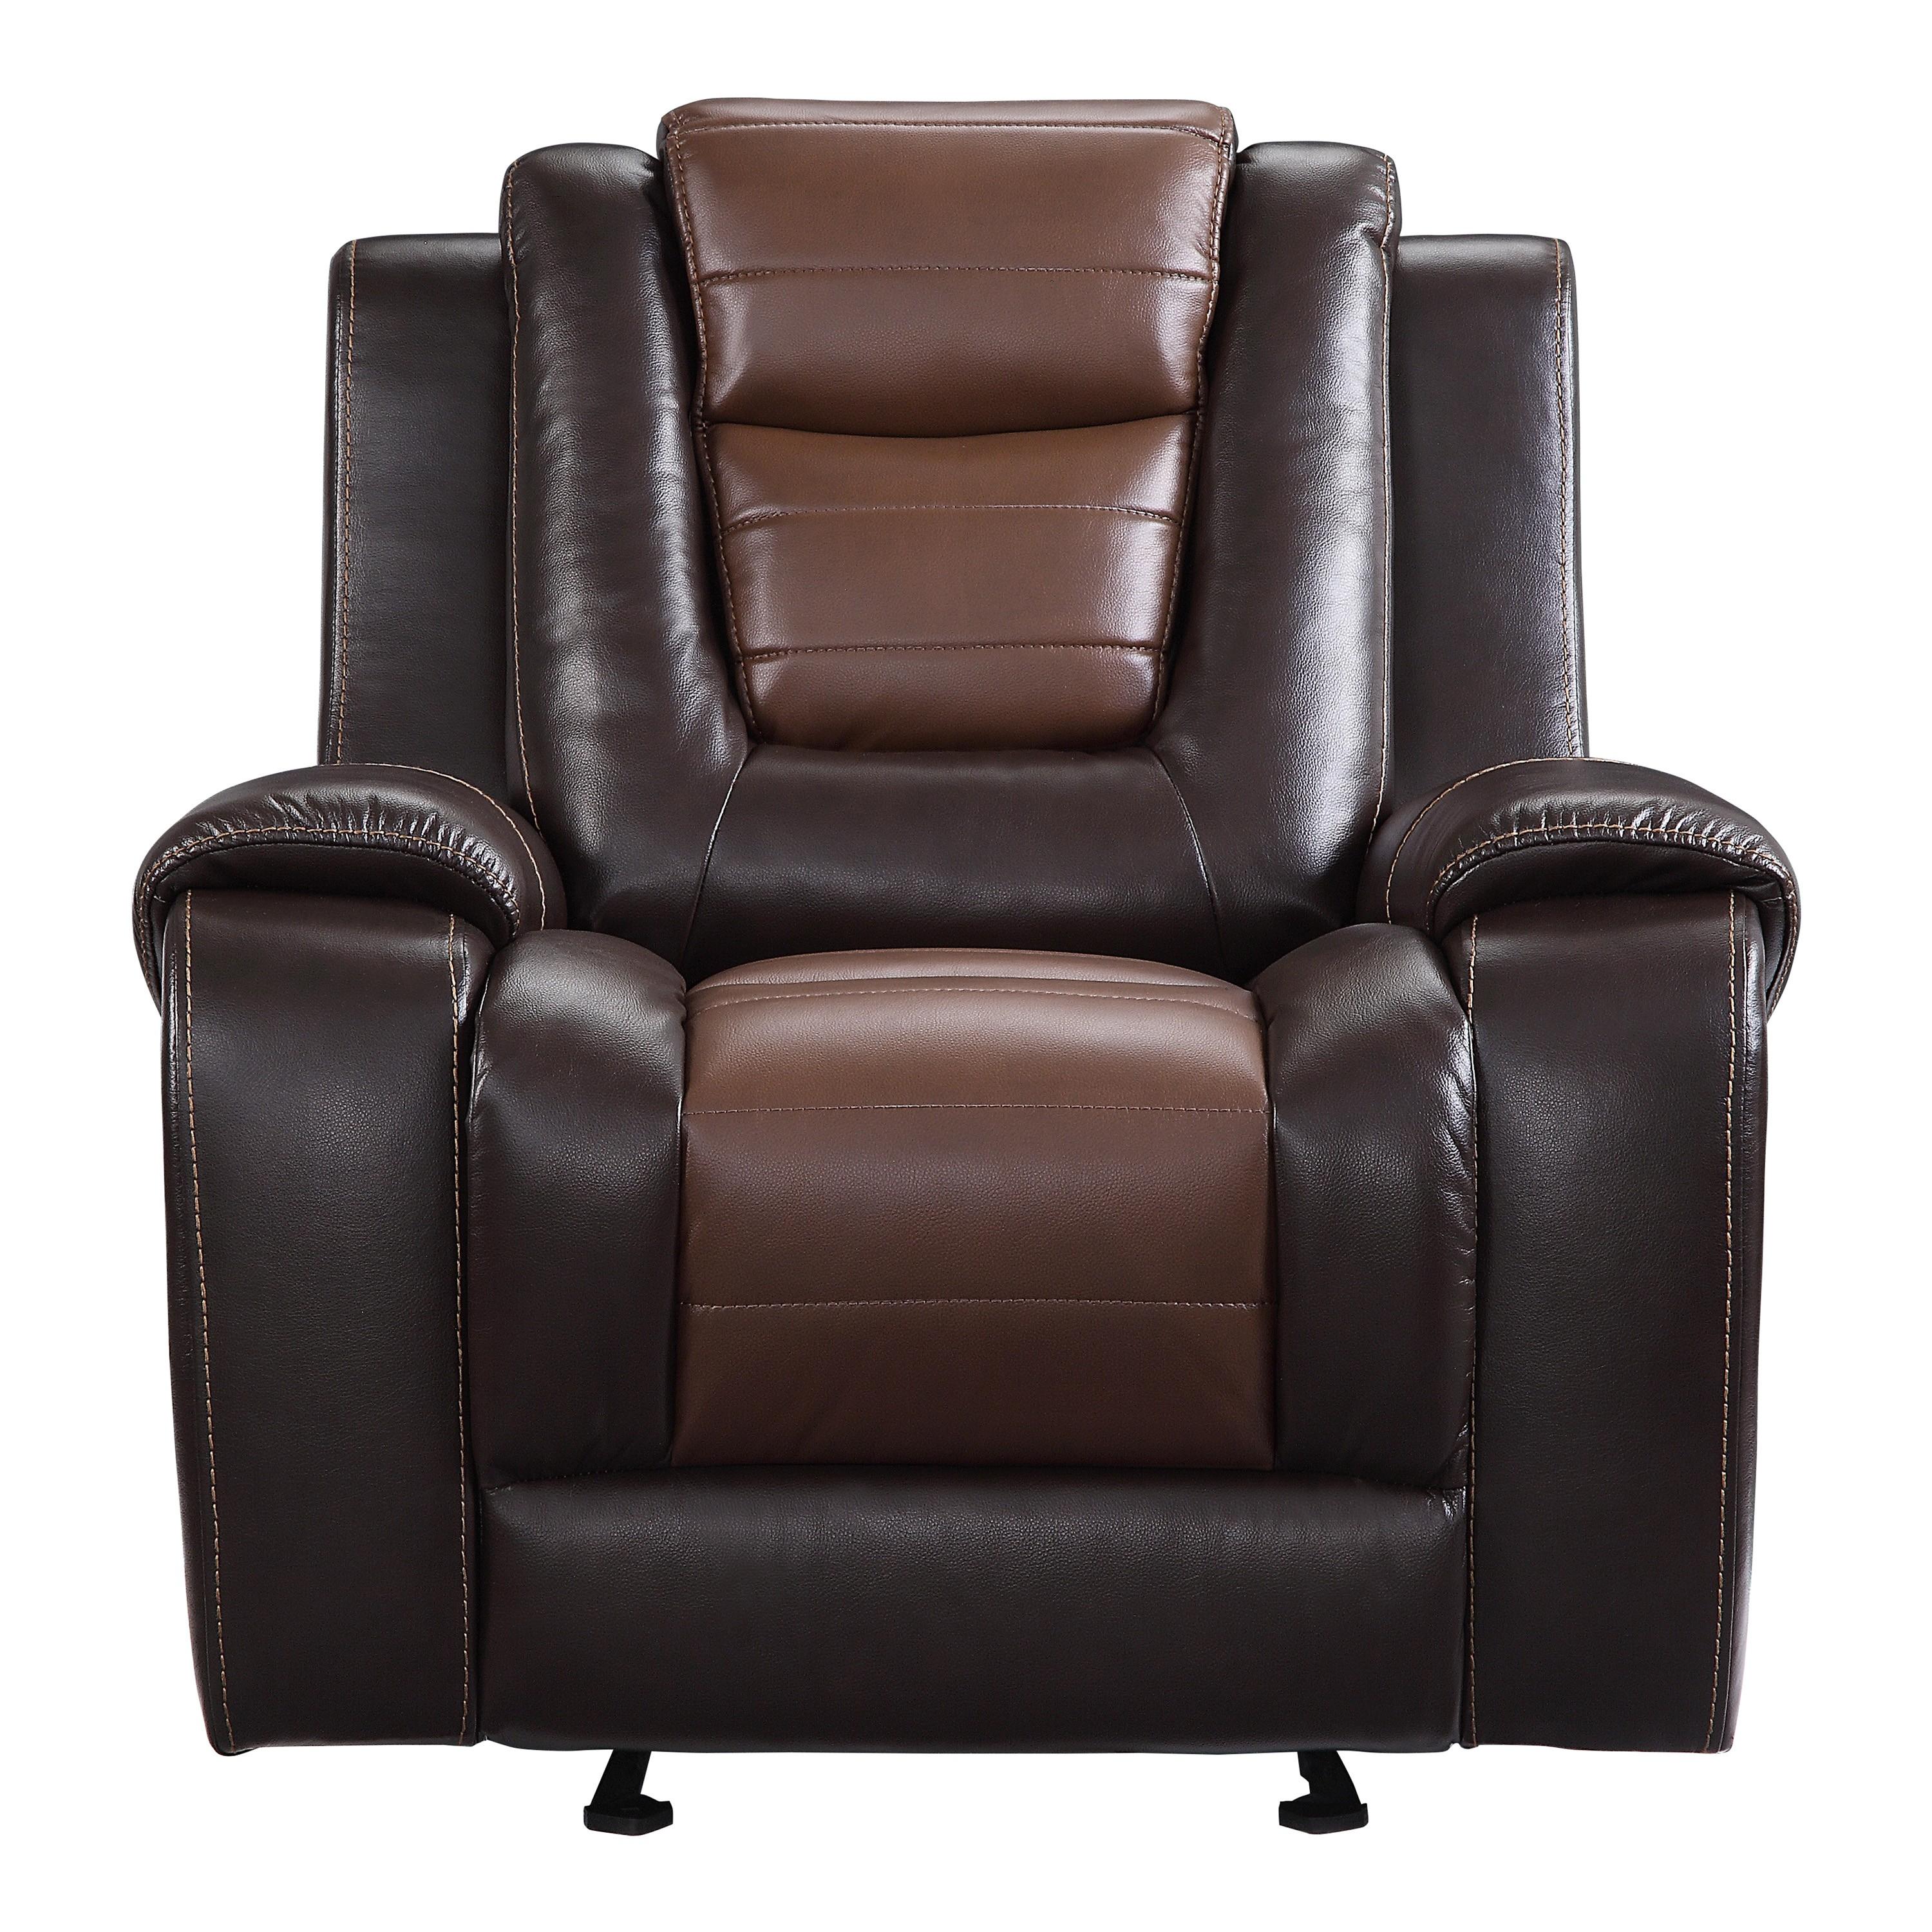 Transitional Reclining Chair 9470BR-1 Briscoe 9470BR-1 in Light Brown, Dark Brown Faux Leather